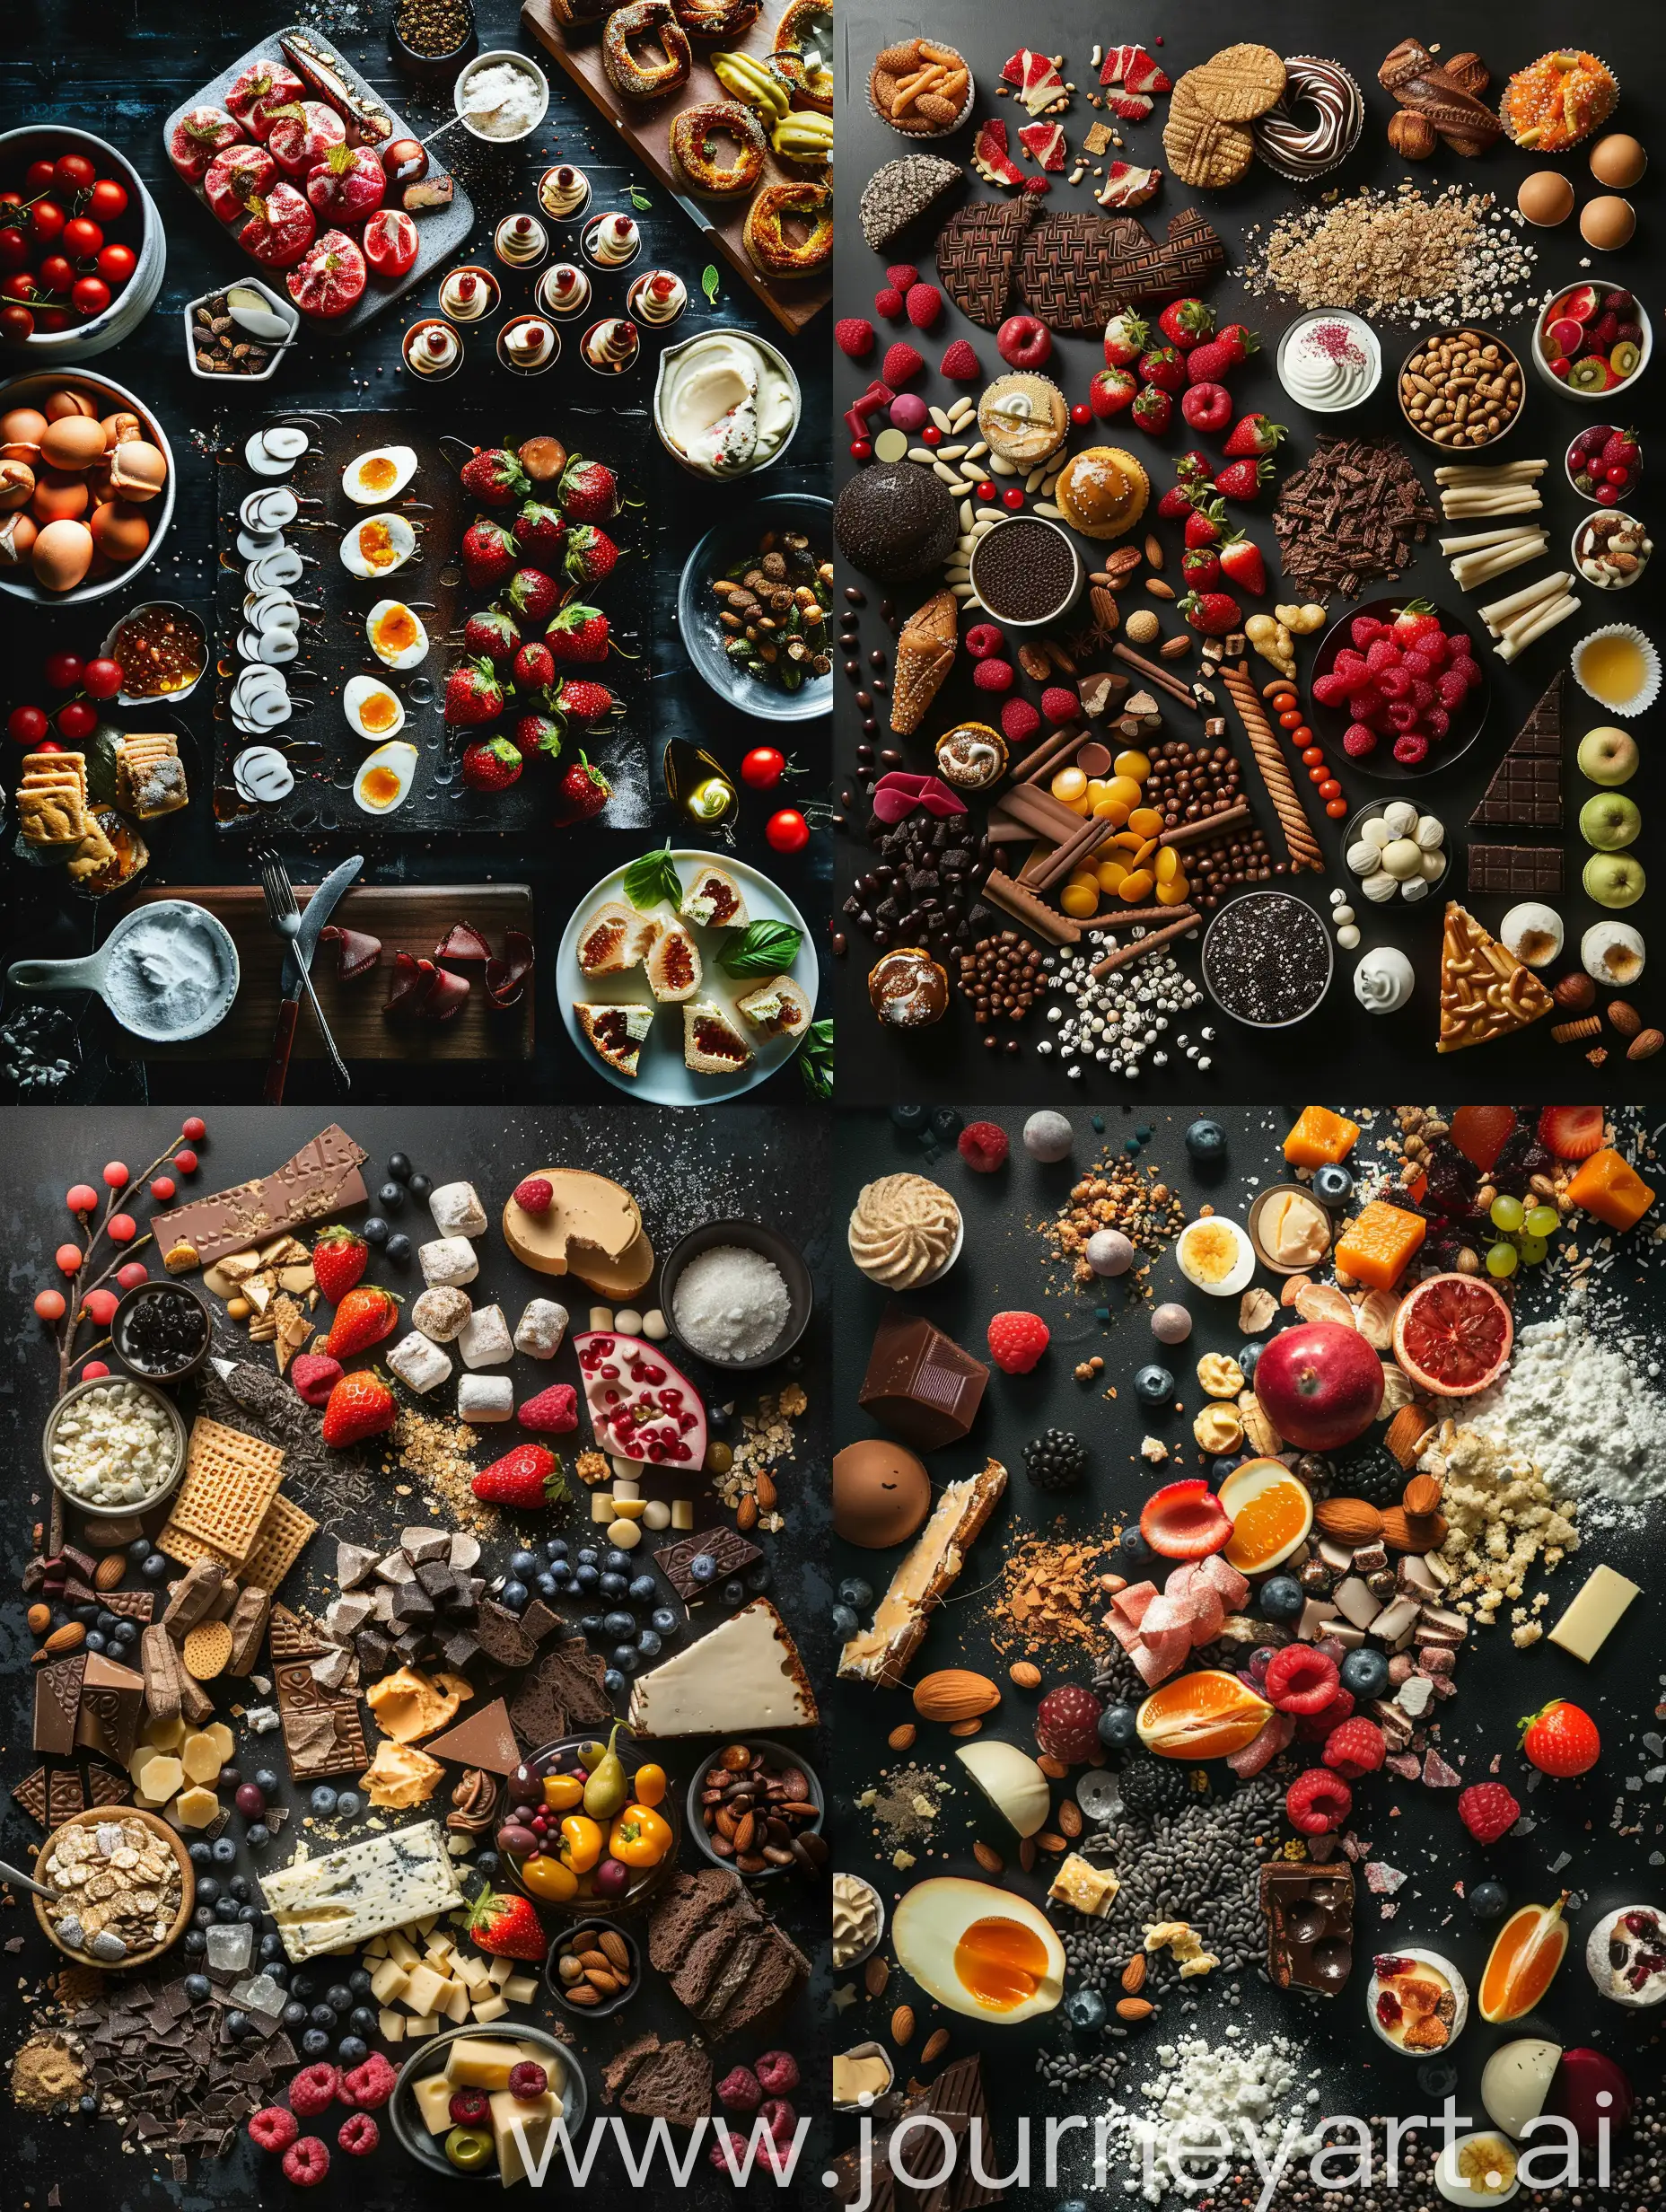 Assorted-Edible-Products-on-Black-Background-Aesthetic-Chaos-Food-Photography